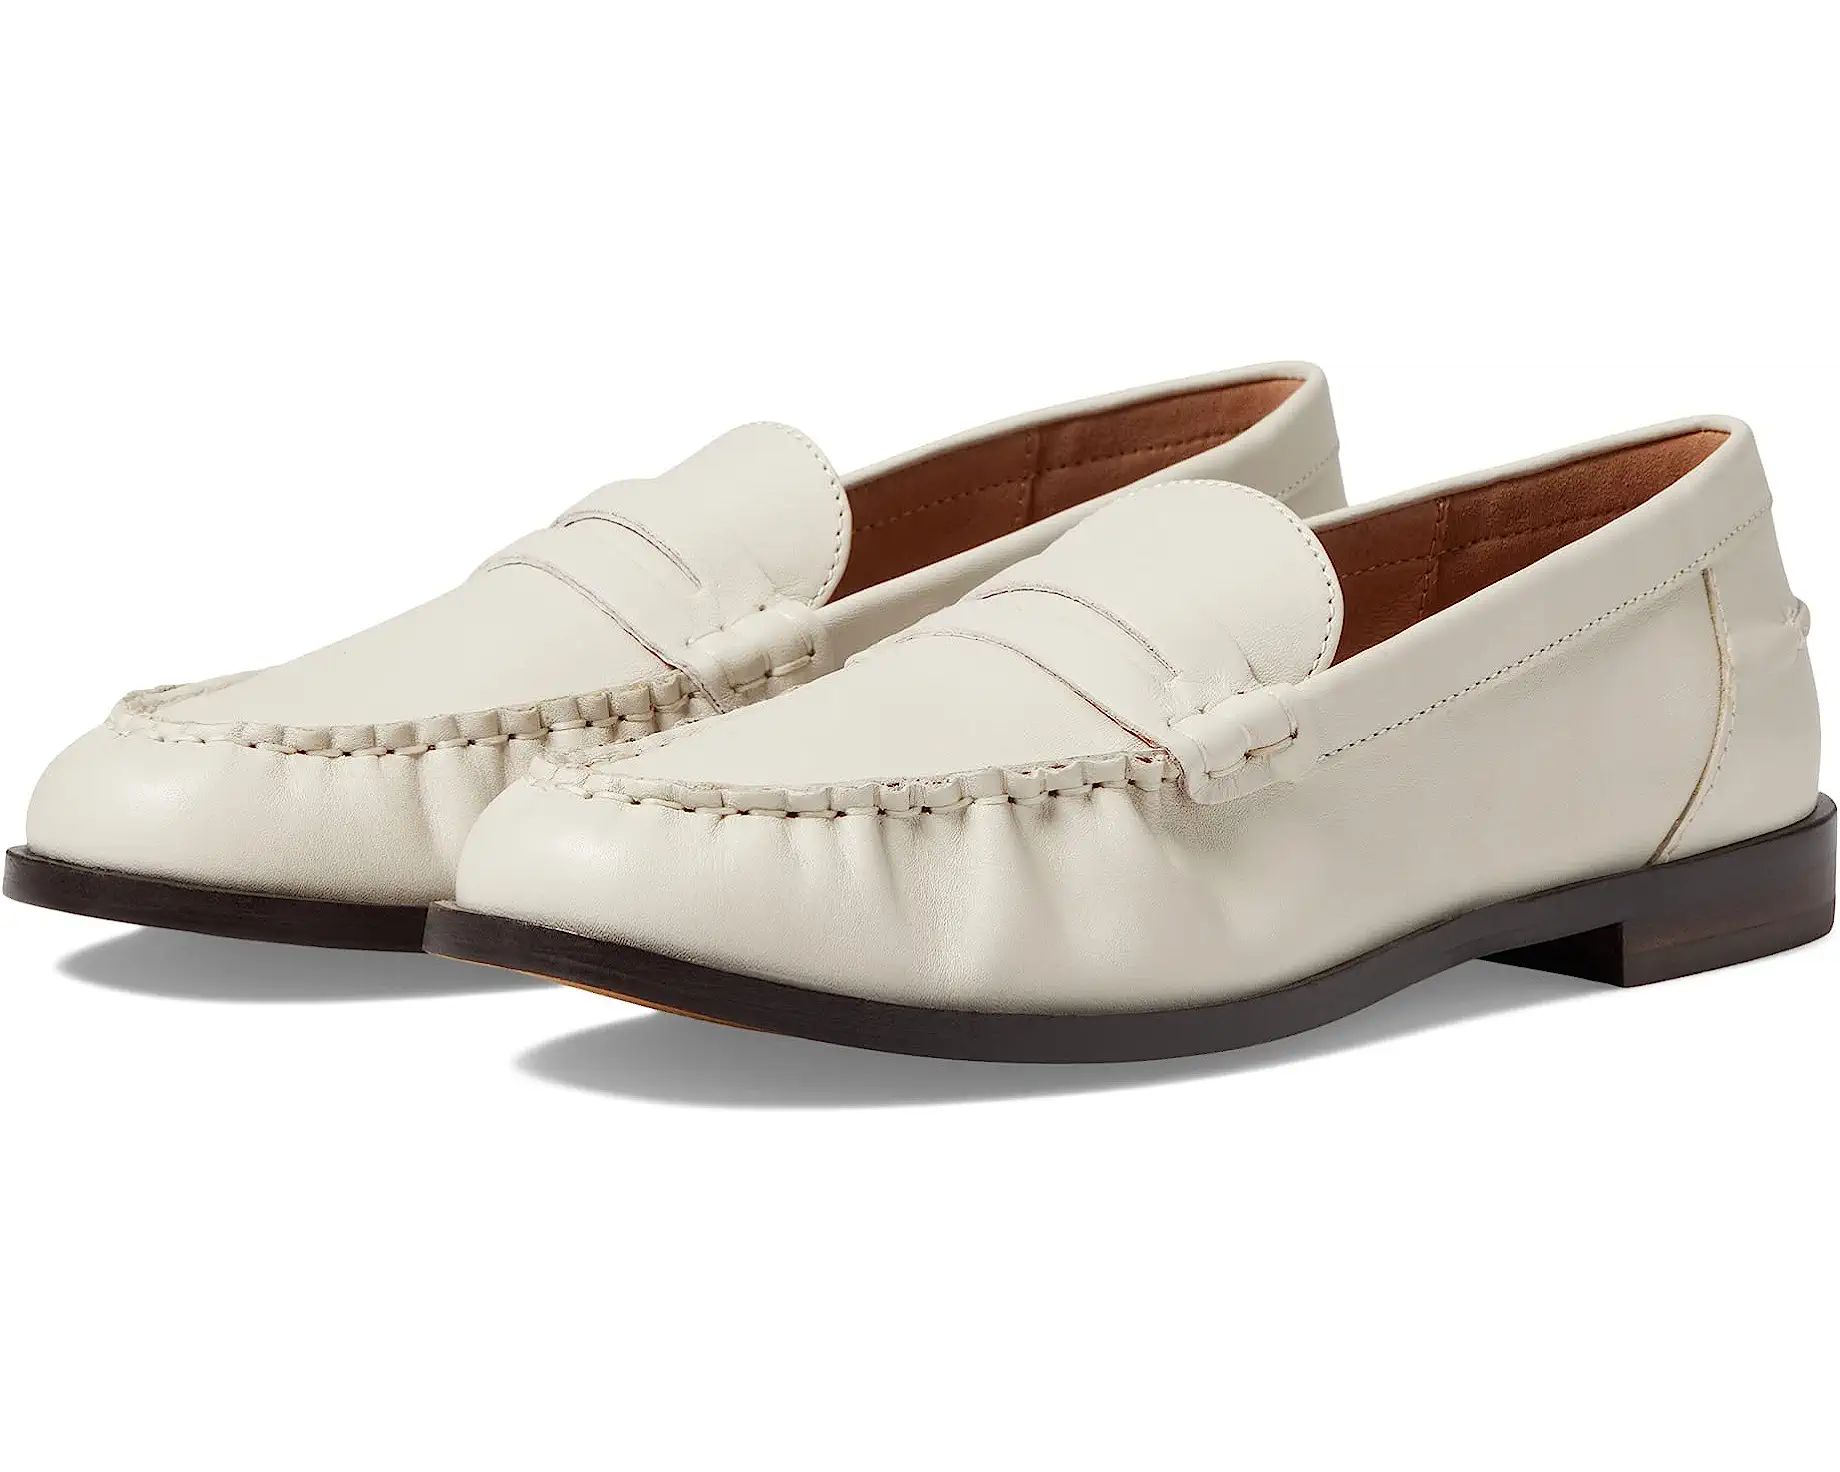 Madewell The Nye Penny Loafer | Zappos